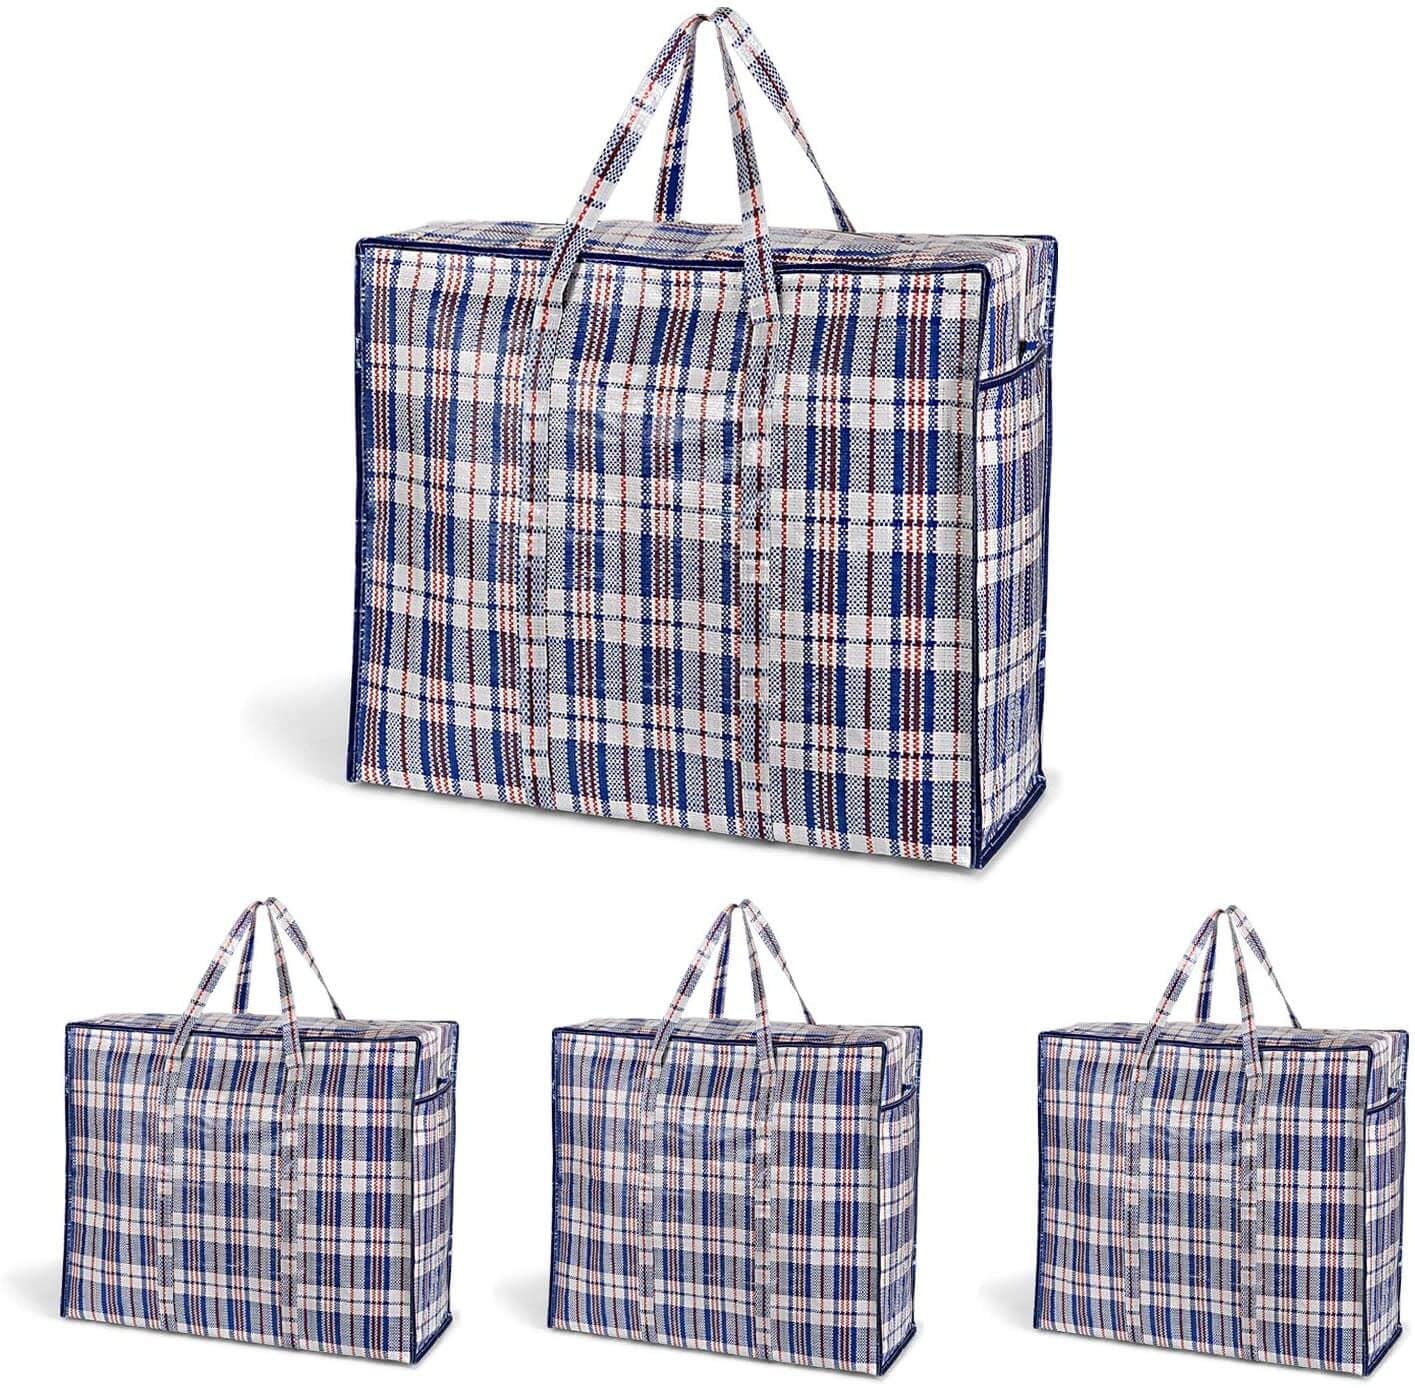 4 Checkered Extra Large Laundry Storage Plastic Shopping Bags with Zipper Ea New 